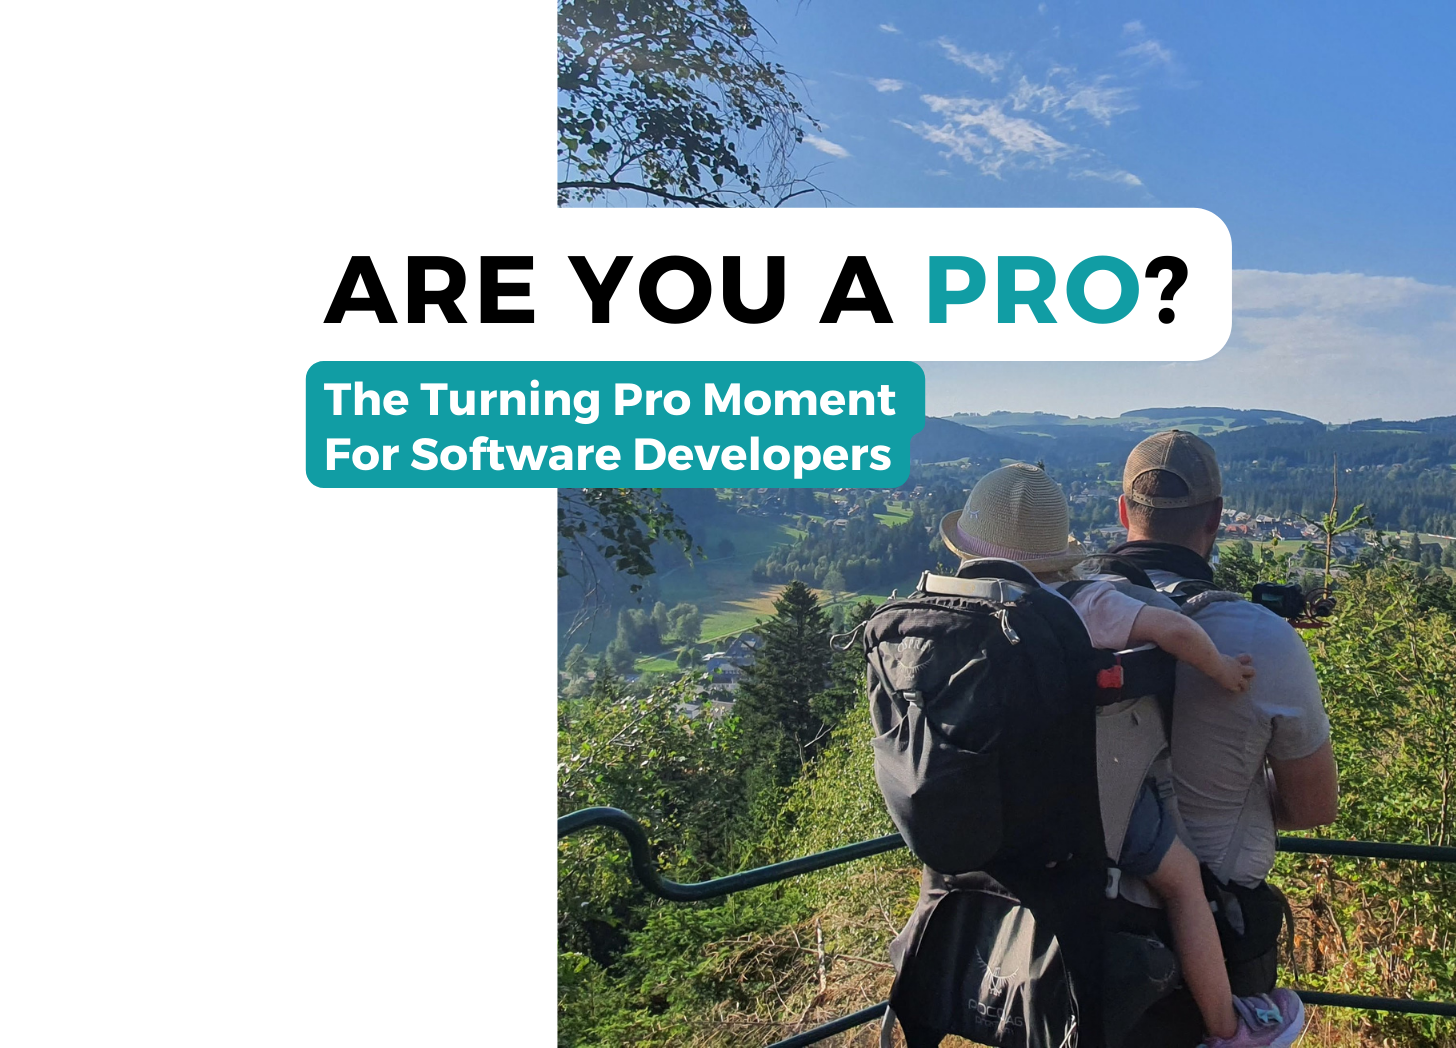 The Turning Pro Moment For Software Developers